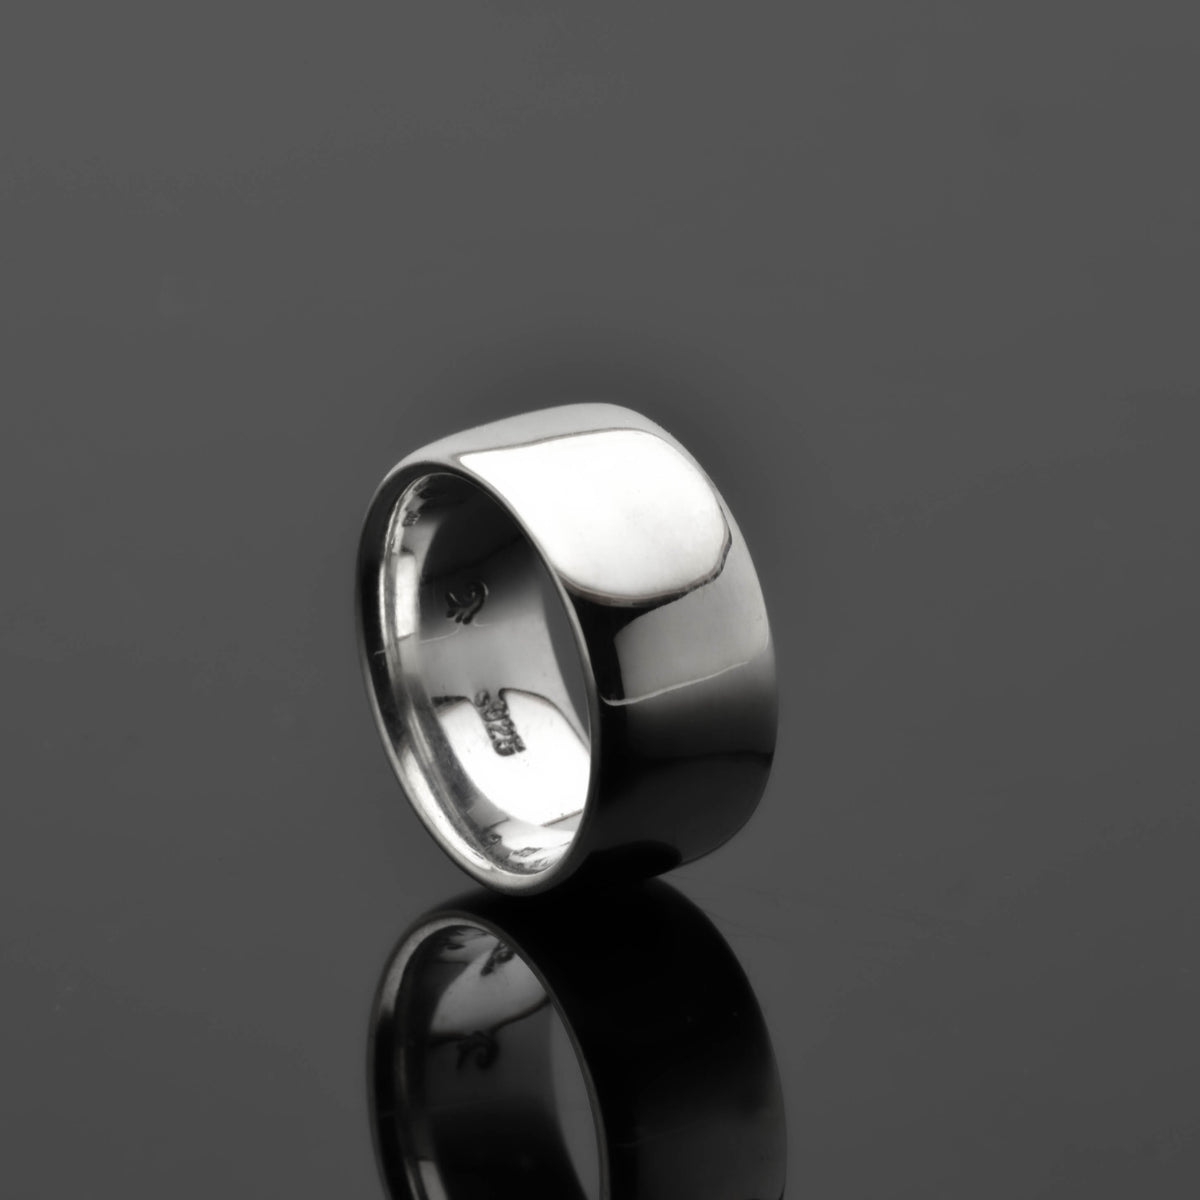 The Sleek and Stylish Sterling Silver Bullet Ring